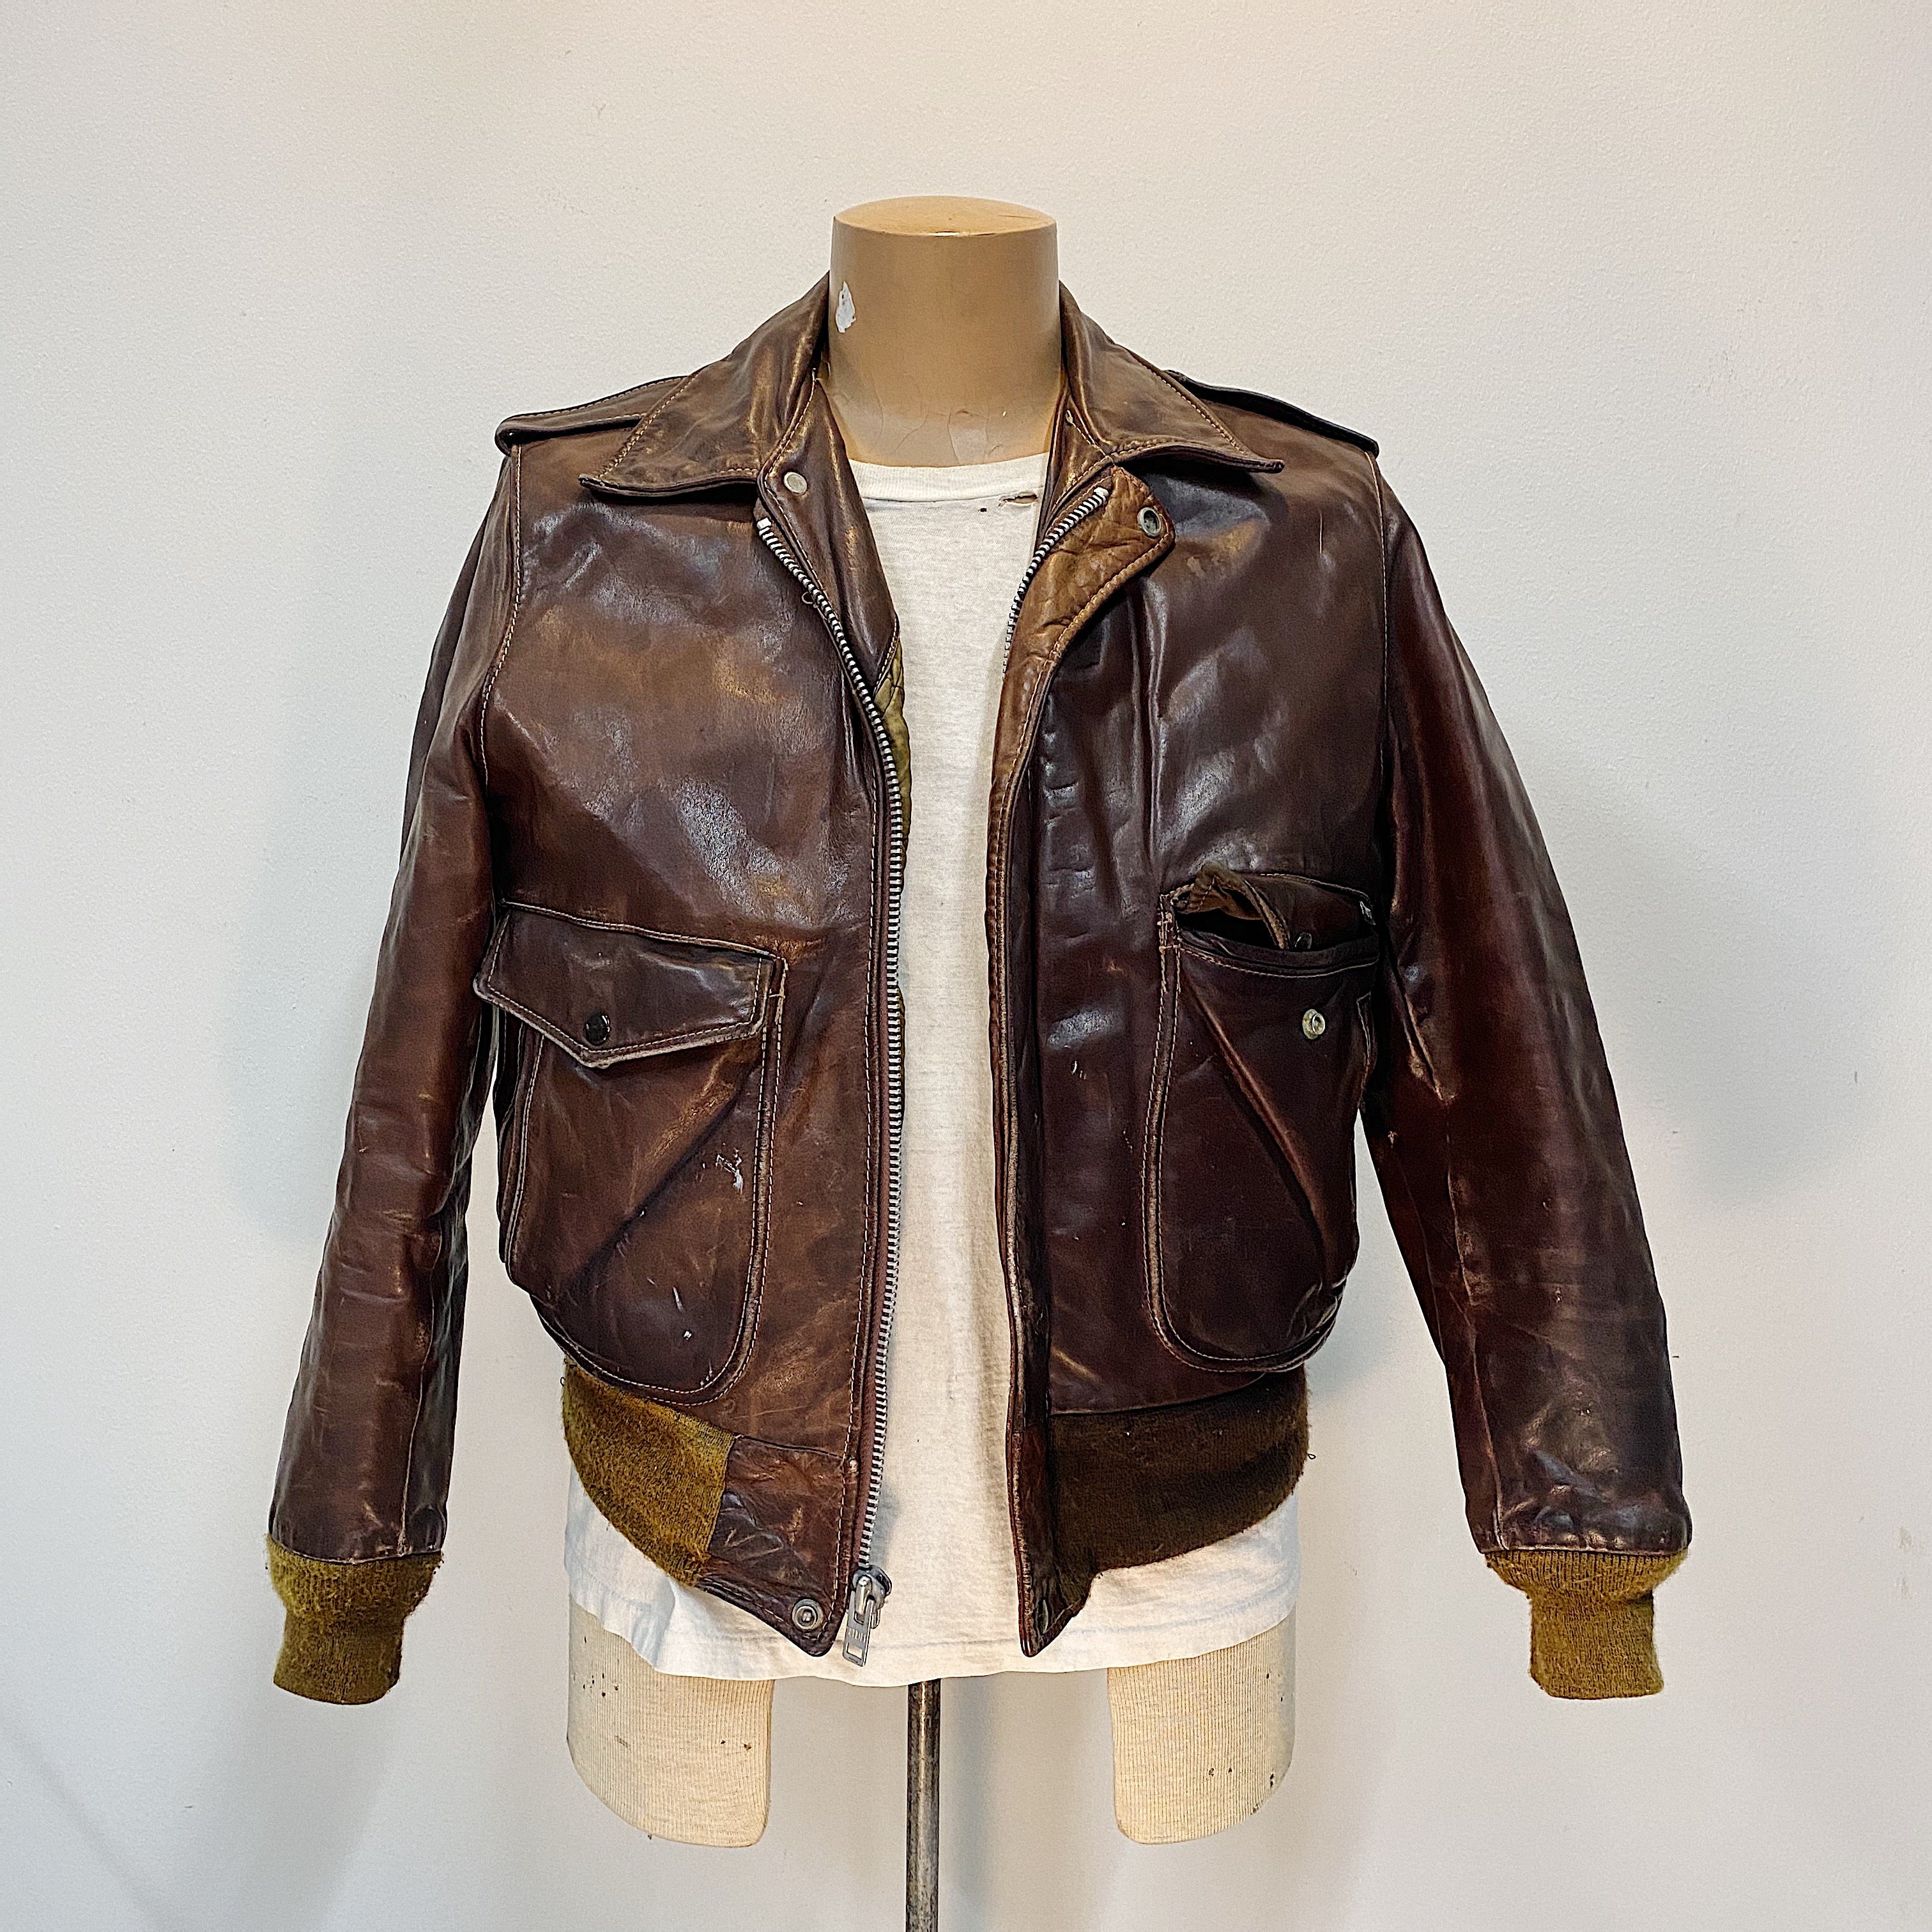 Vintage Schott Flight Jacket - I-S-674-M-S - Brown Leather Bomber - Size 42 - 1970s - Cool Patina - Made in USA